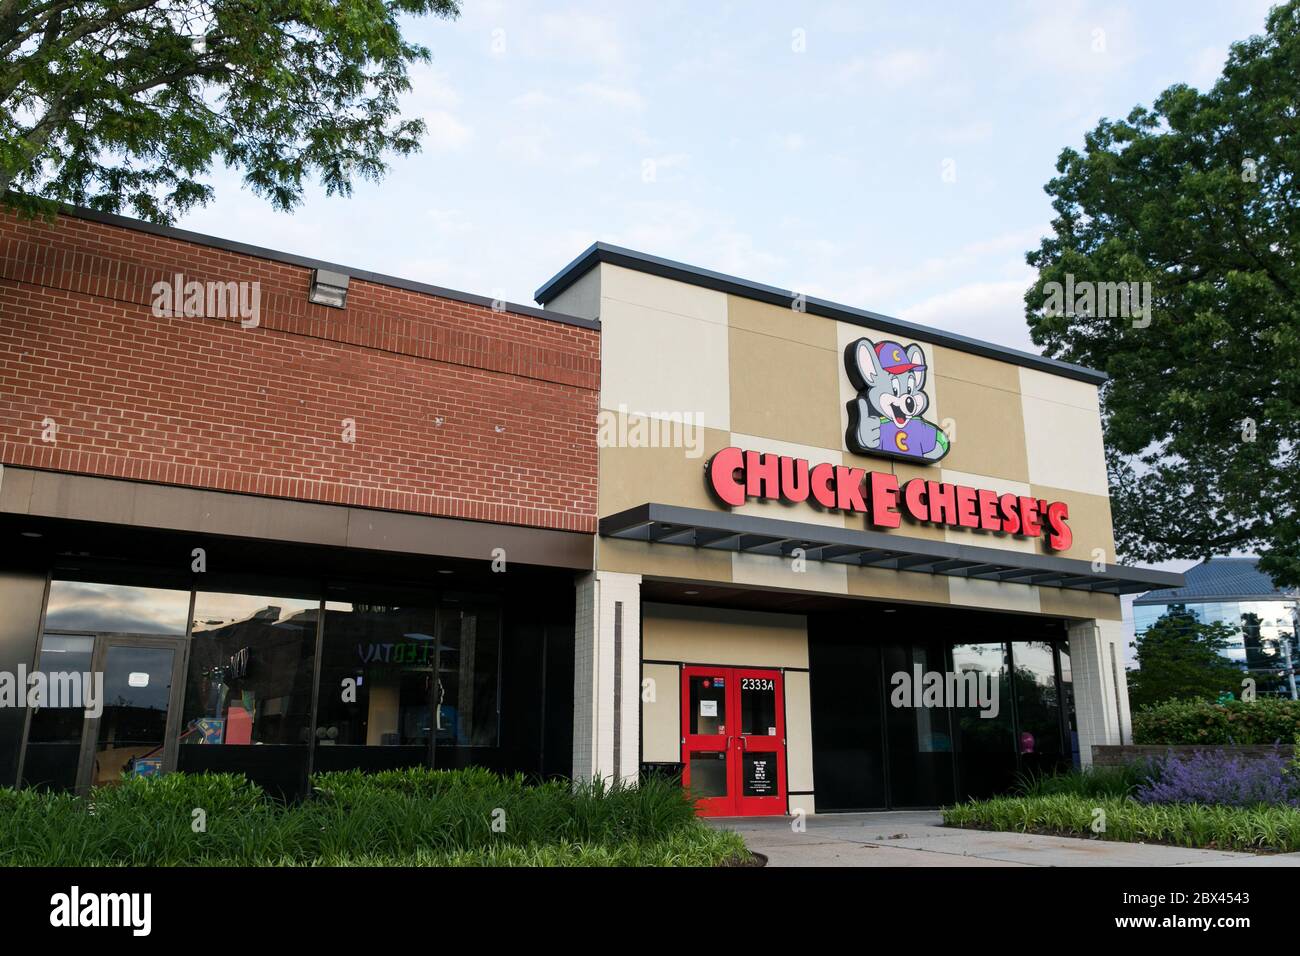 A logo sign outside of a Chuck E. Cheese location in Annapolis, Maryland on May 25, 2020. Stock Photo